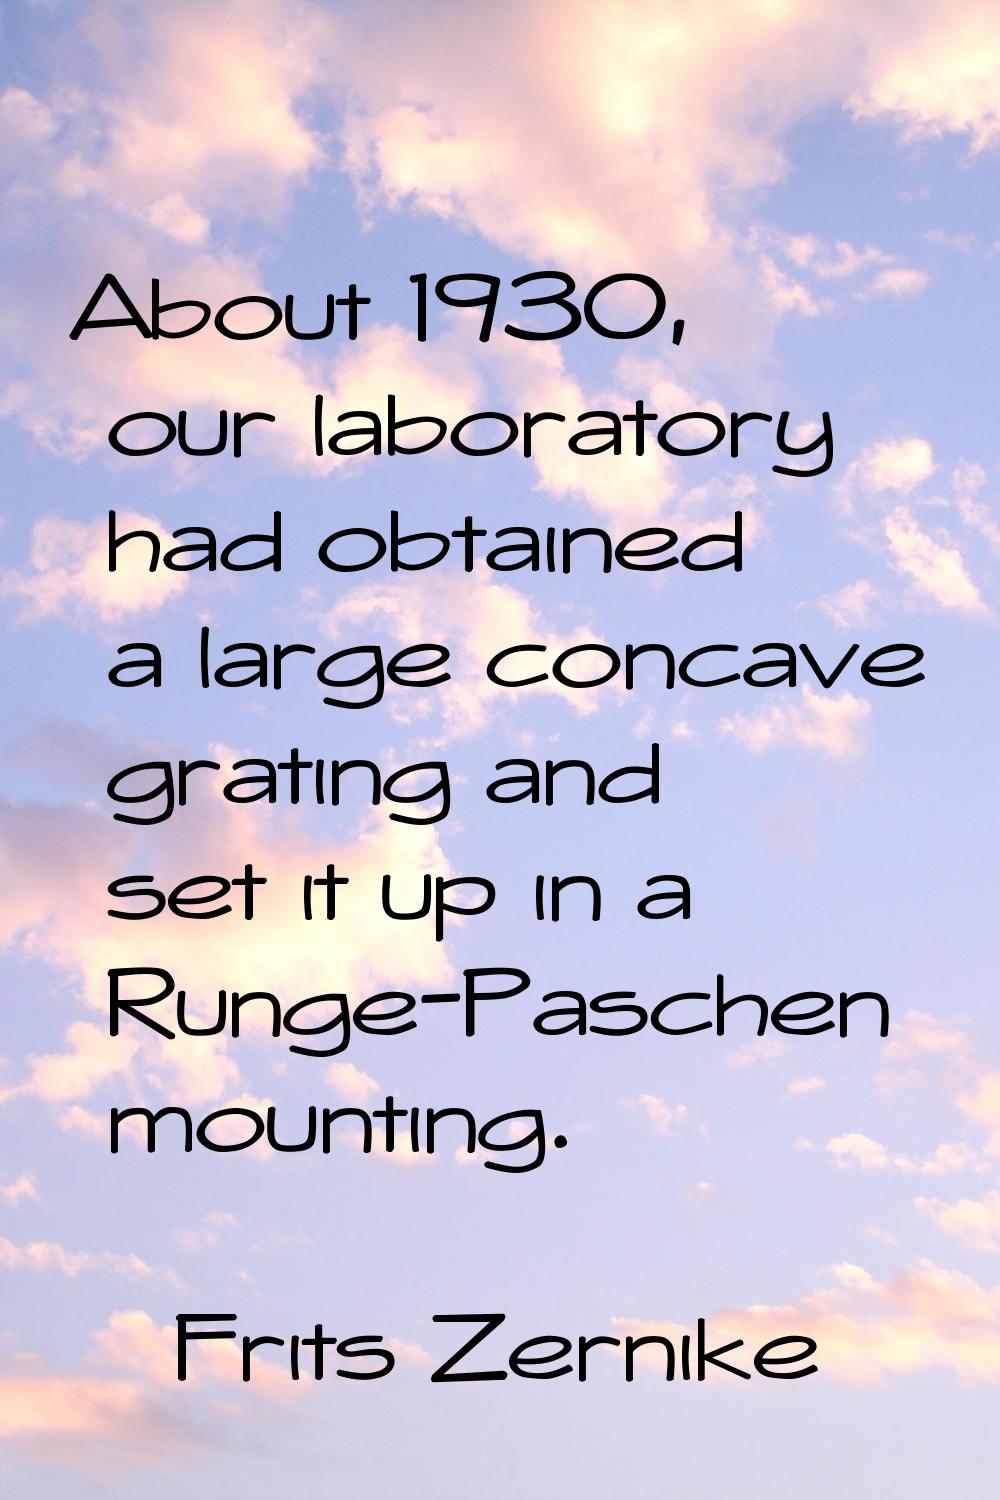 About 1930, our laboratory had obtained a large concave grating and set it up in a Runge-Paschen mo